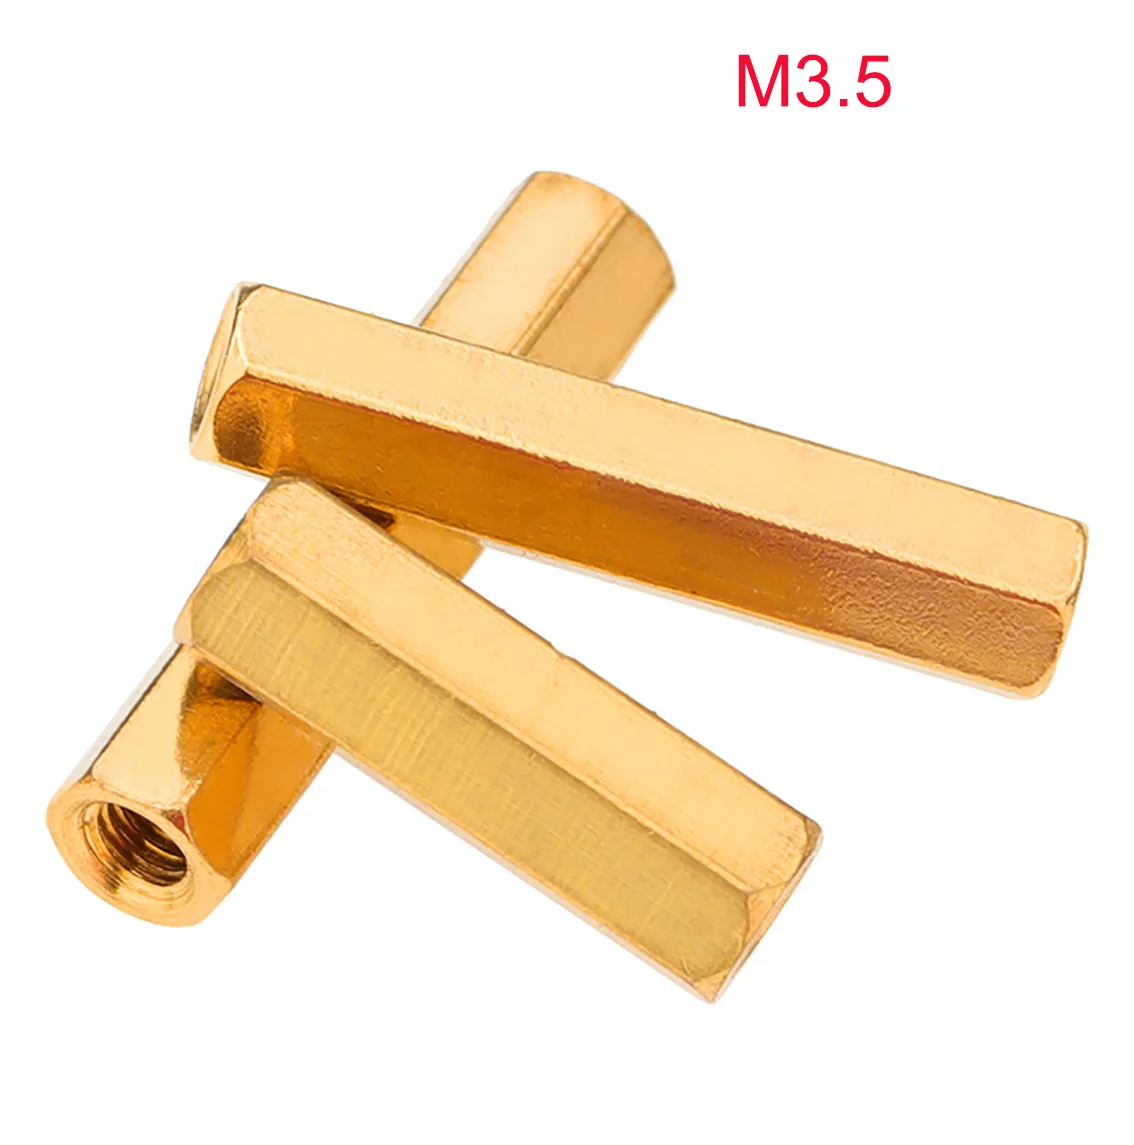 

5Pcs M3.5 Side 5mm Brass Hex Female To Female Standoff Spacer Column Hexagon Hand Knob Nuts PCB Motherboard DIY Model Parts